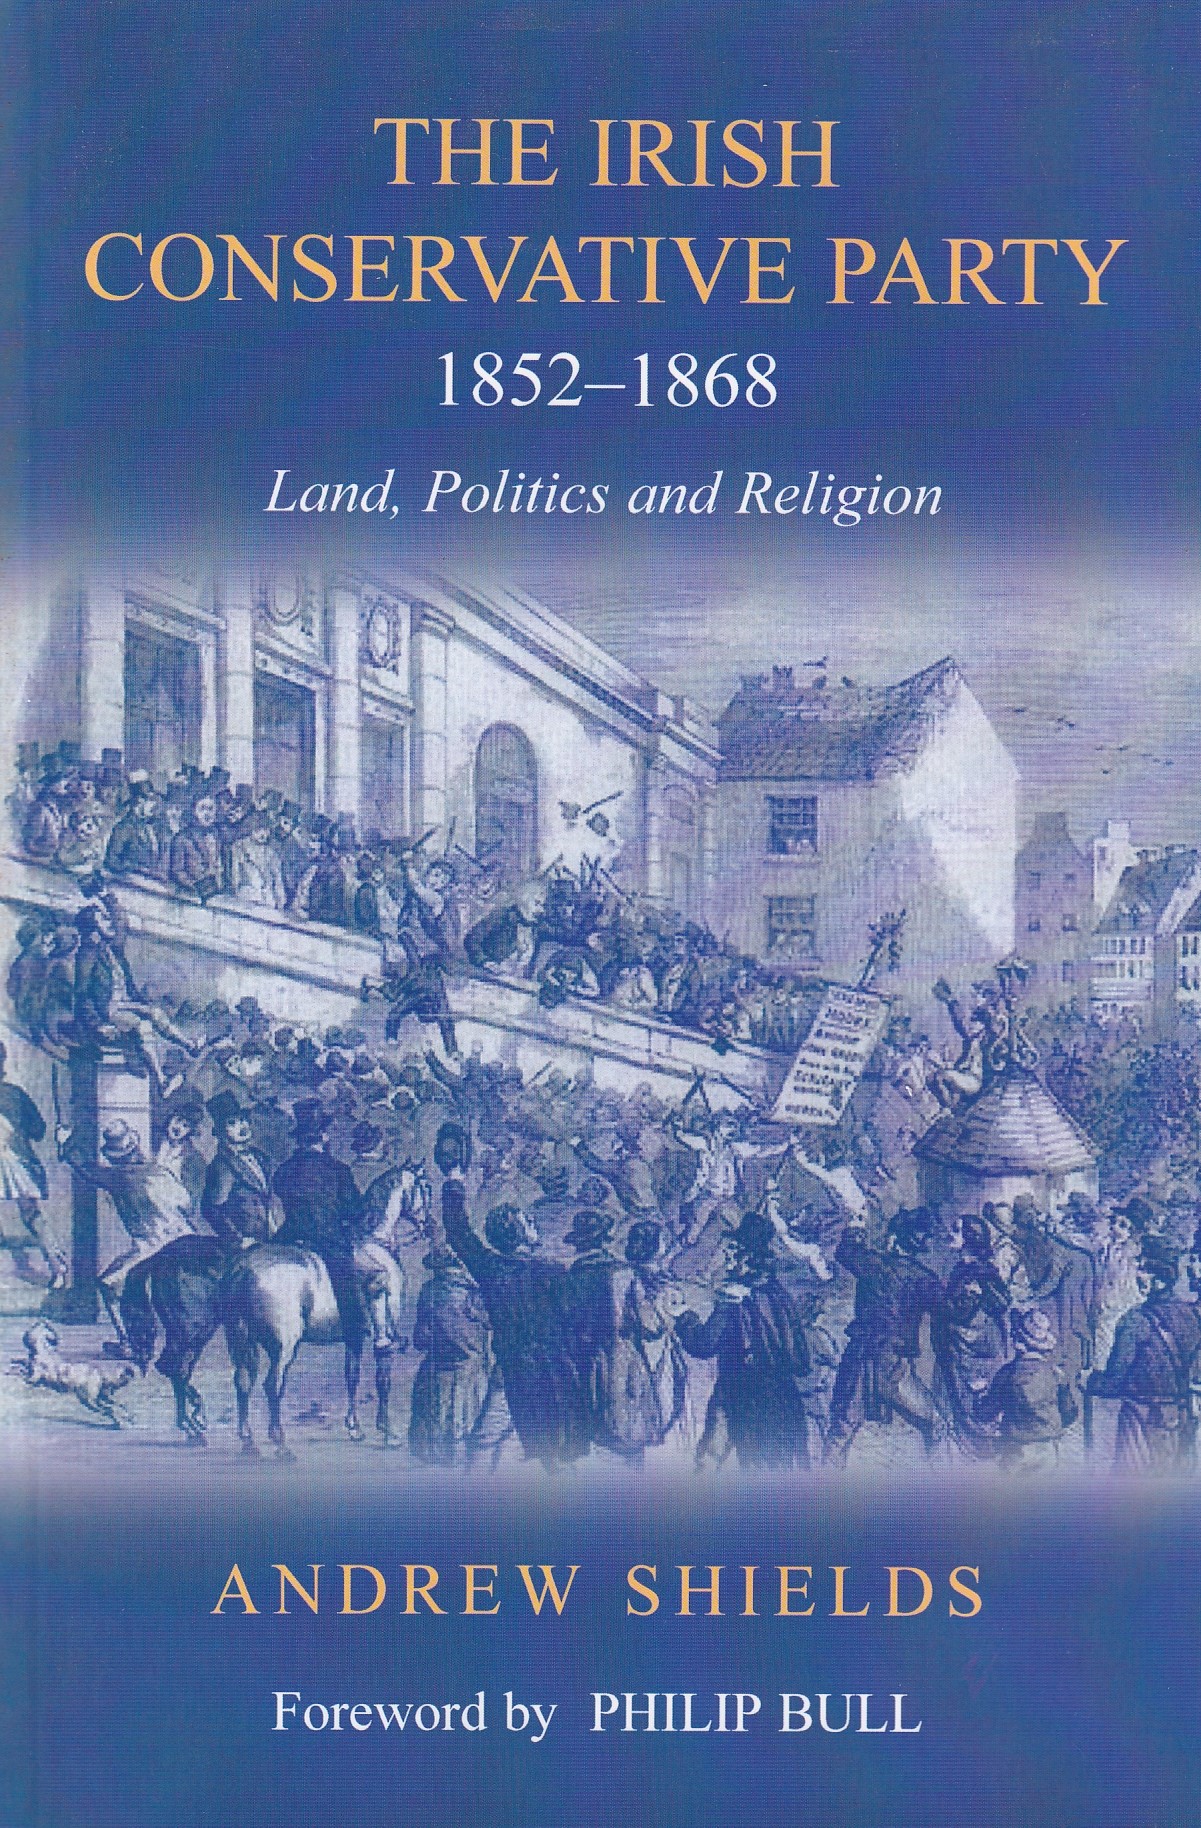 The Irish Conservative Party, 1852-1868: Land, Politics and Religion [Signed] | Andrew Shields | Charlie Byrne's